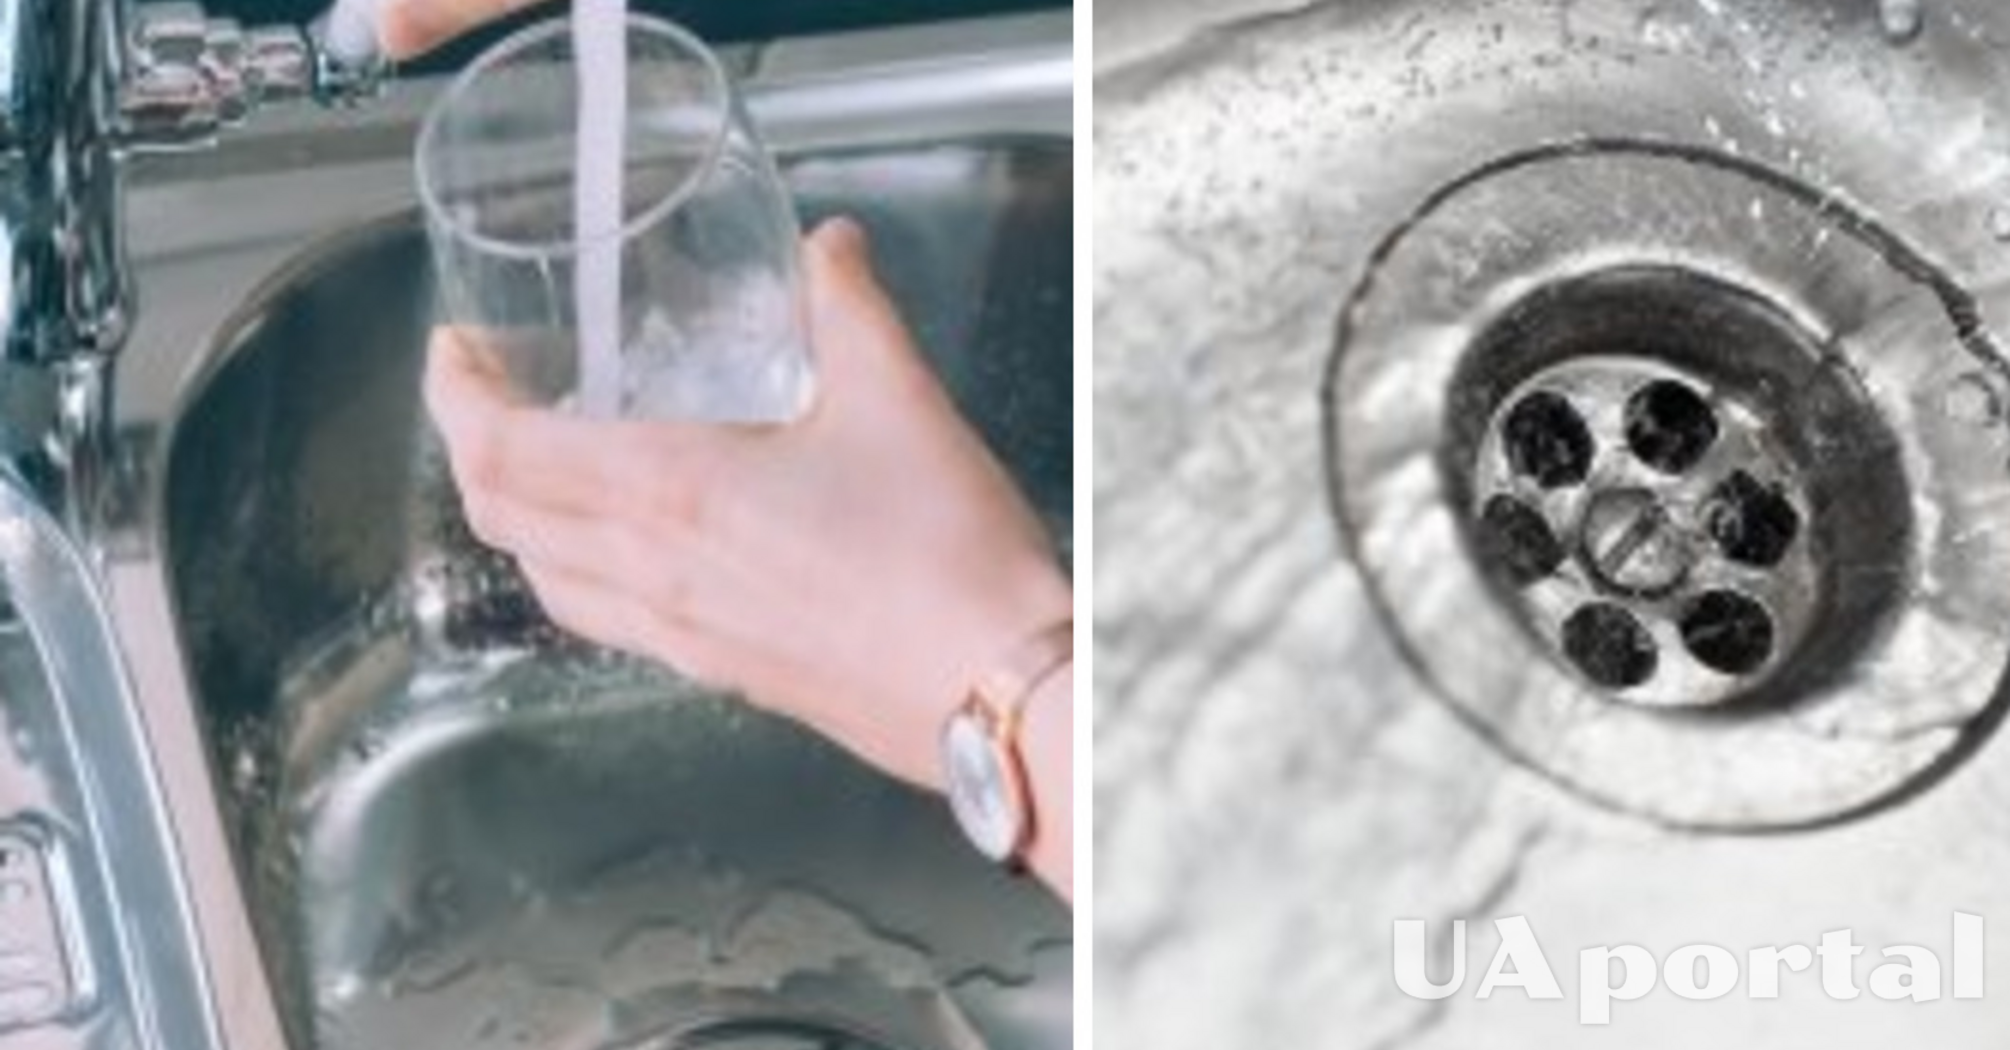 How to remove a blockage in the sink in 5 minutes: an effective life hack